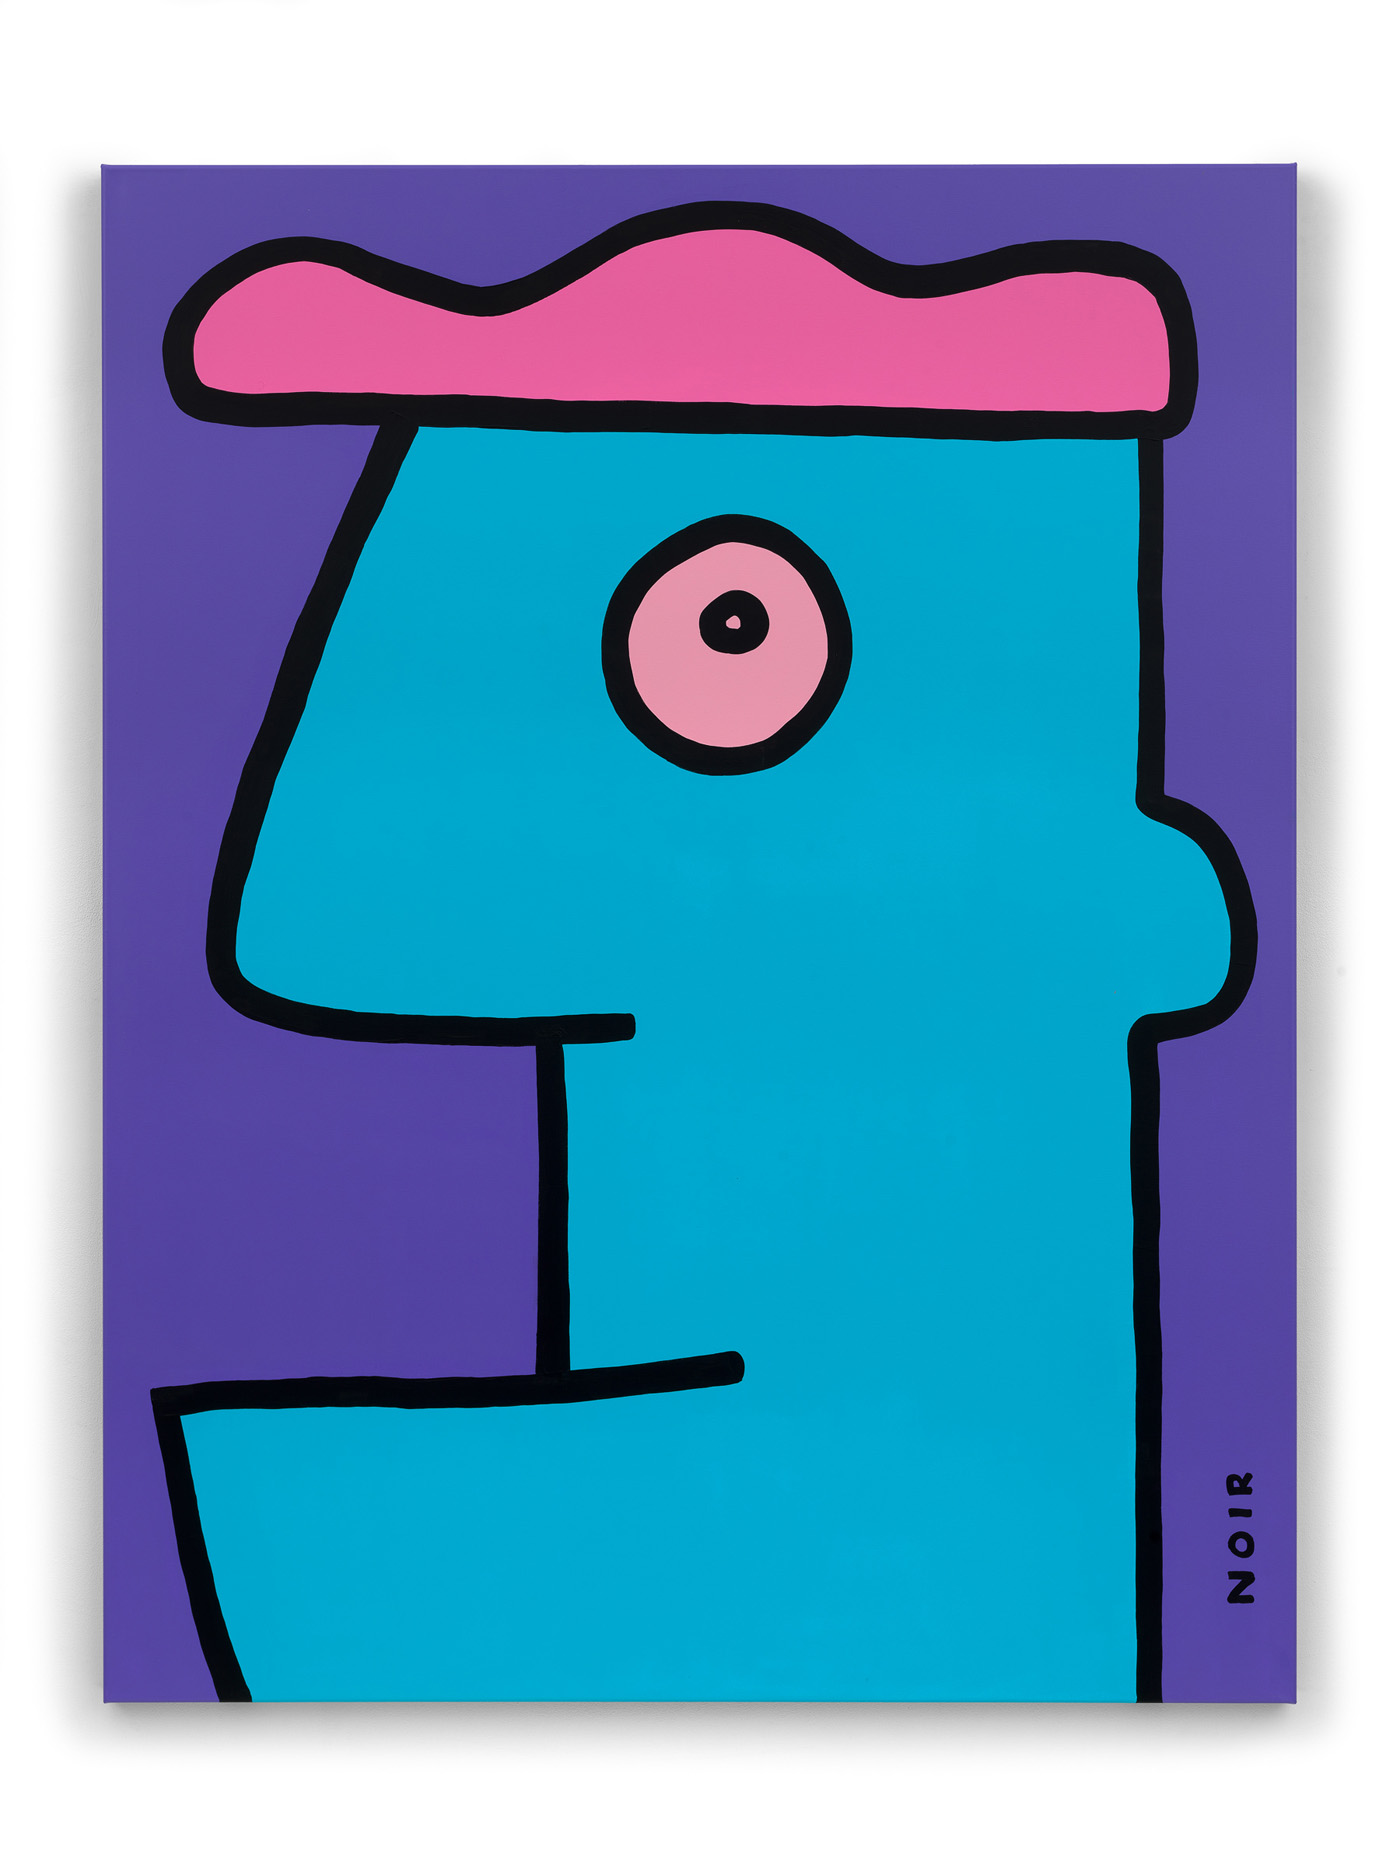 Thierry Noir - Staying fit is my number one project for the week